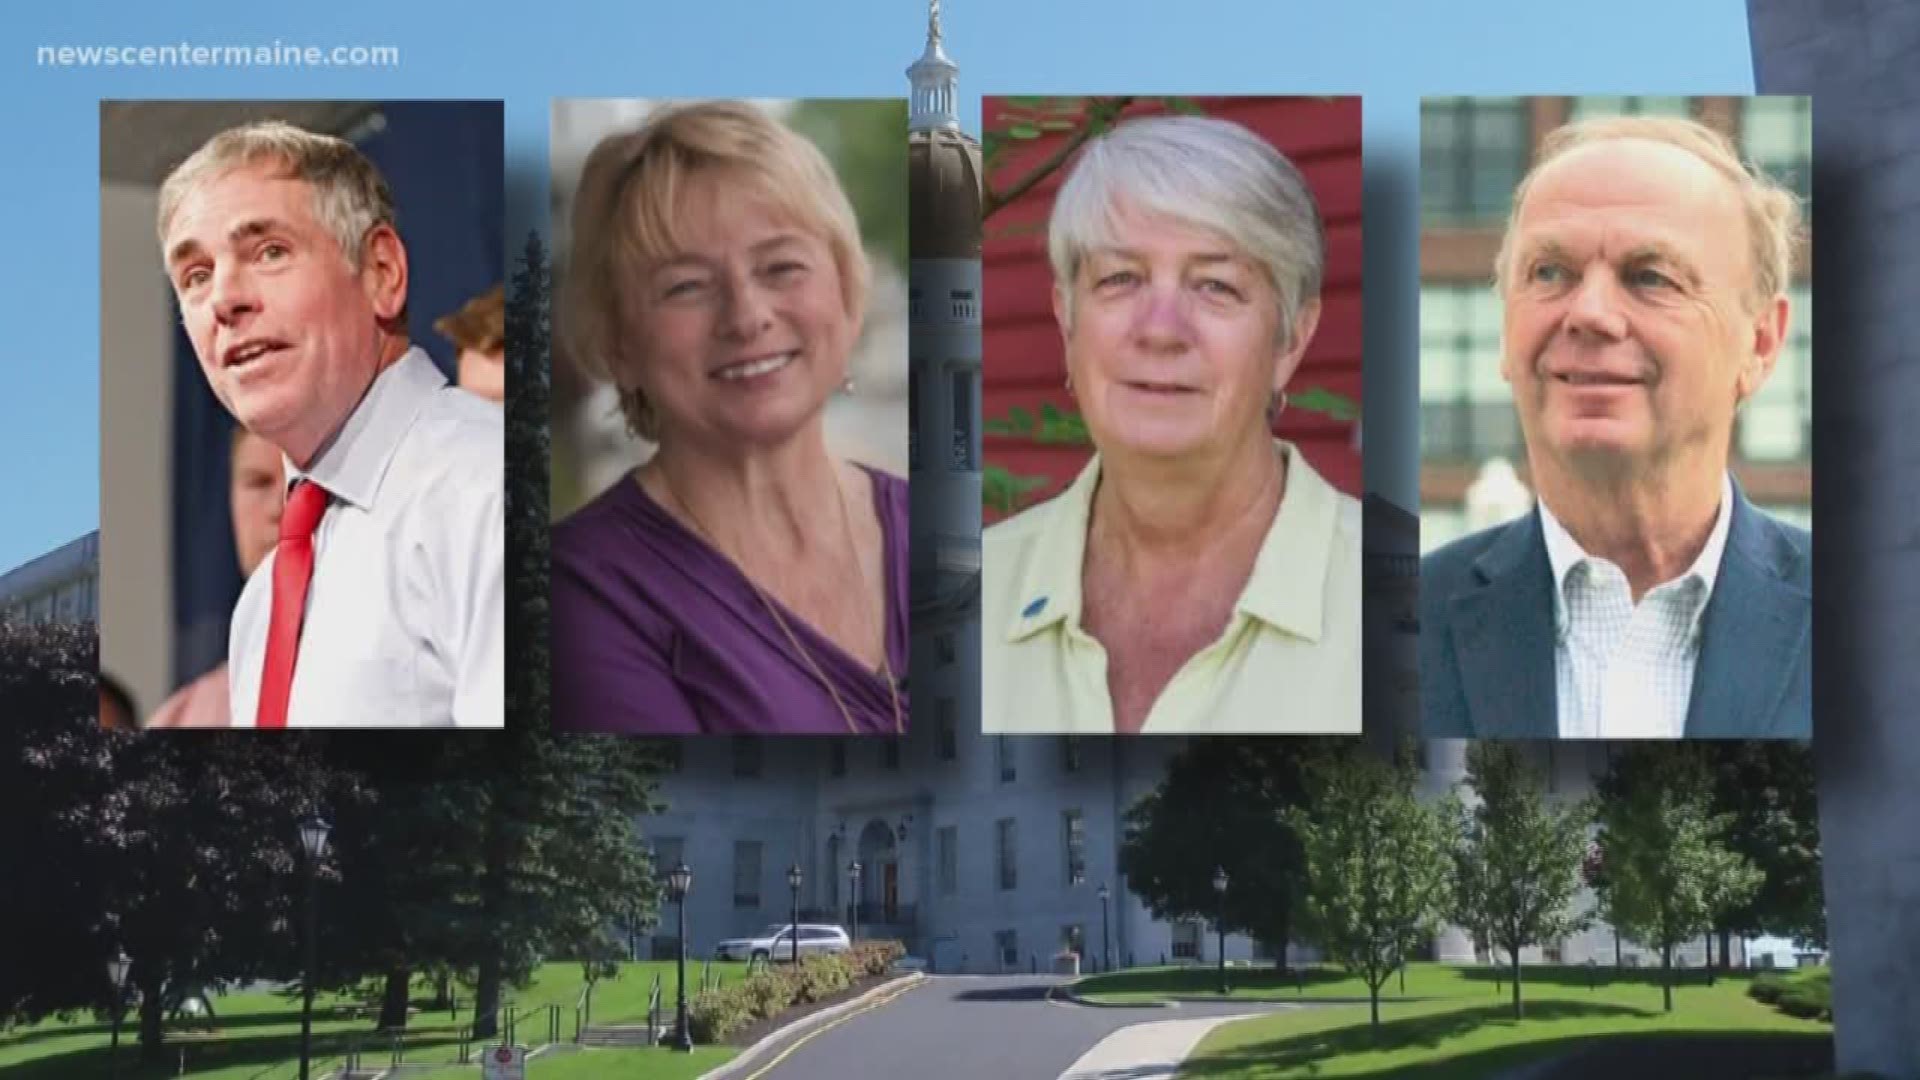 Candidates for ME governor set to face off Wednesday in debate